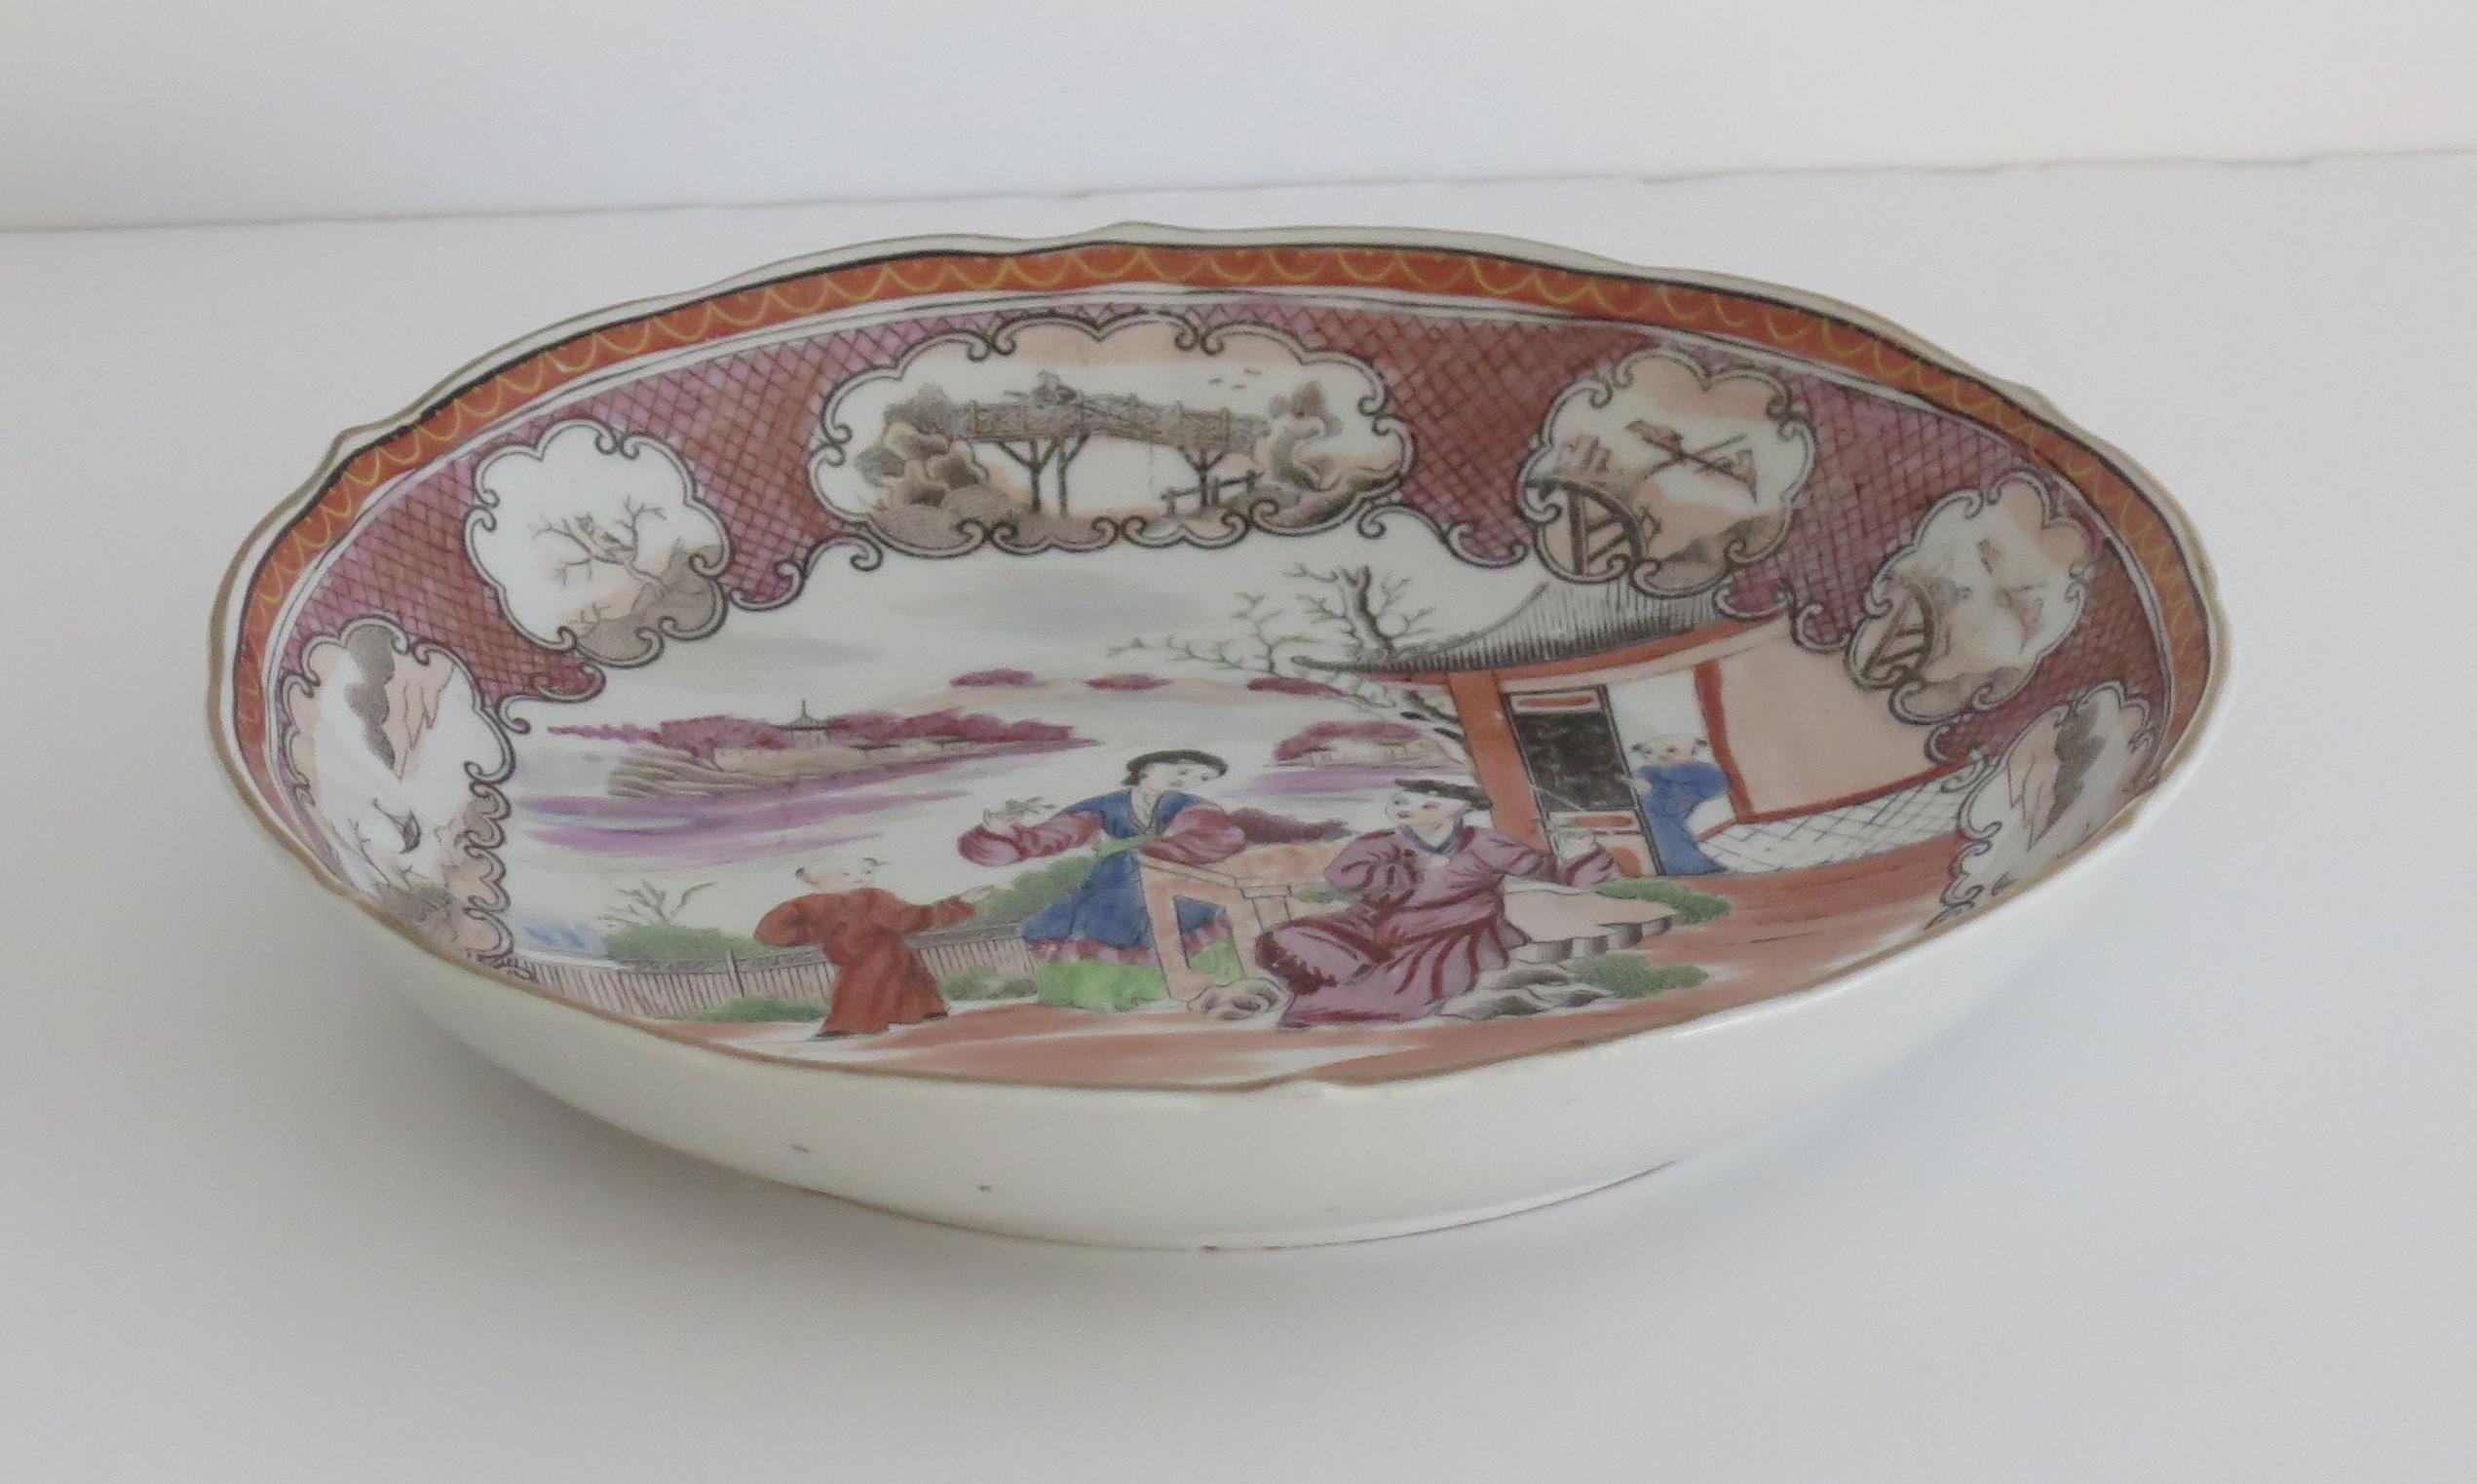 Early Miles Mason Saucer Dish Porcelain Boy at Door Pattern, circa 1805 For Sale 1